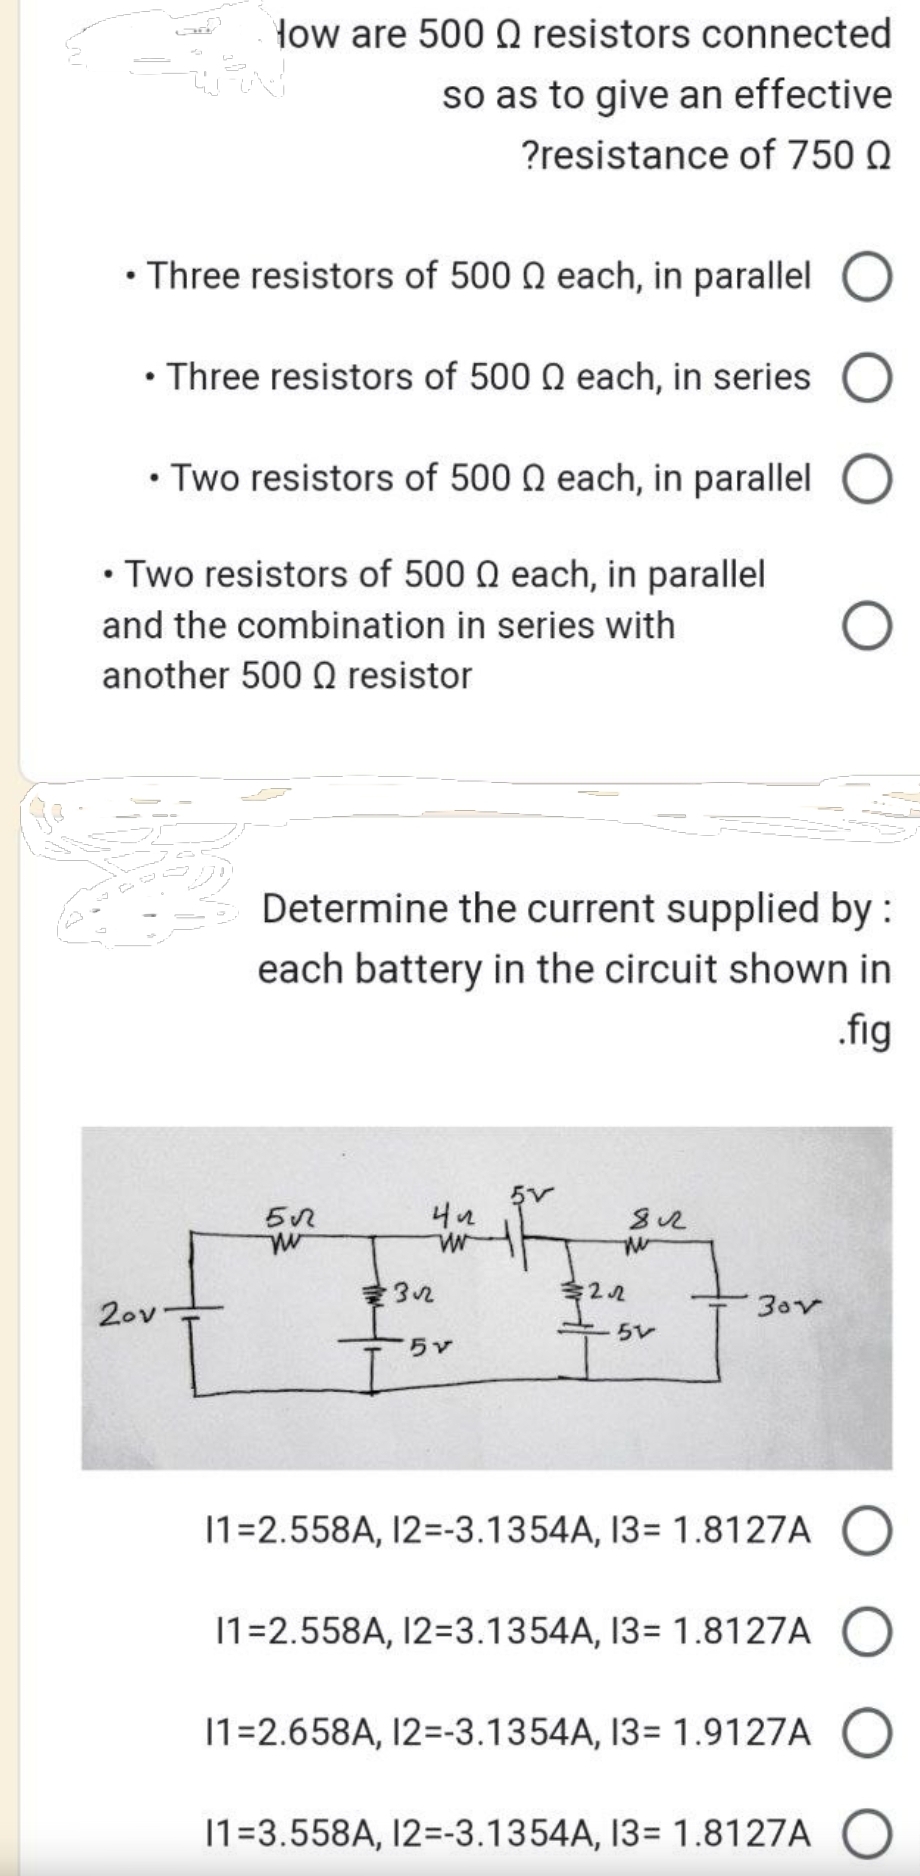 How are 500 resistors connected
so as to give an effective
?resistance of 750 Q
Three resistors of 500 each, in parallel
• Three resistors of 500 each, in series
• Two resistors of 500 Q each, in parallel
• Two resistors of 500 0 each, in parallel
and the combination in series with
another 500 resistor
20v
Determine the current supplied by :
each battery in the circuit shown in
.fig
5√
w
422
W
32
for
2.22
812
51
3ov
11=2.558A, 12=-3.1354A, 13= 1.8127A
11=2.558A, 12=3.1354A, 13= 1.8127A
11=2.658A, 12=-3.1354A, 13= 1.9127A
11=3.558A, 12=-3.1354A, 13= 1.8127A